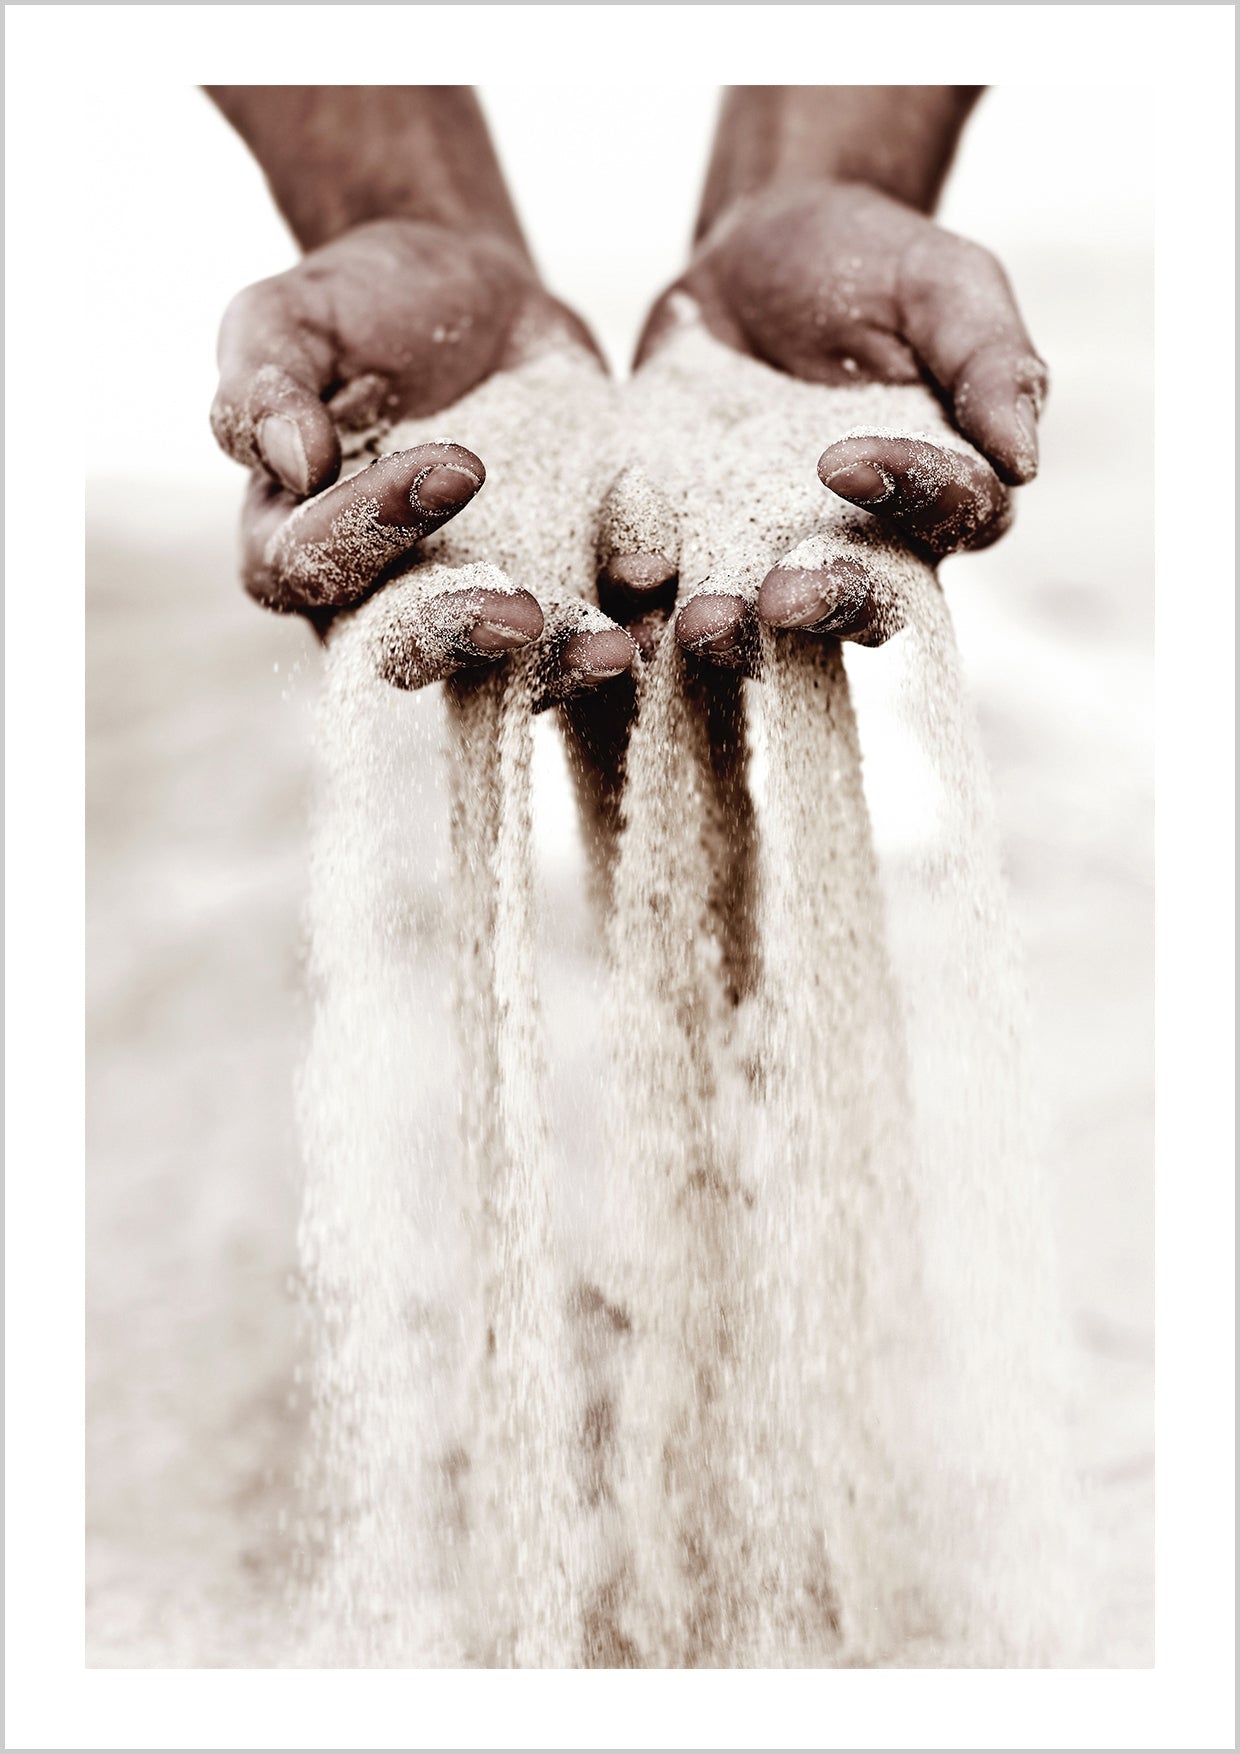 Photograph of a pair of hands holding sand that's slipping through the fingers. 